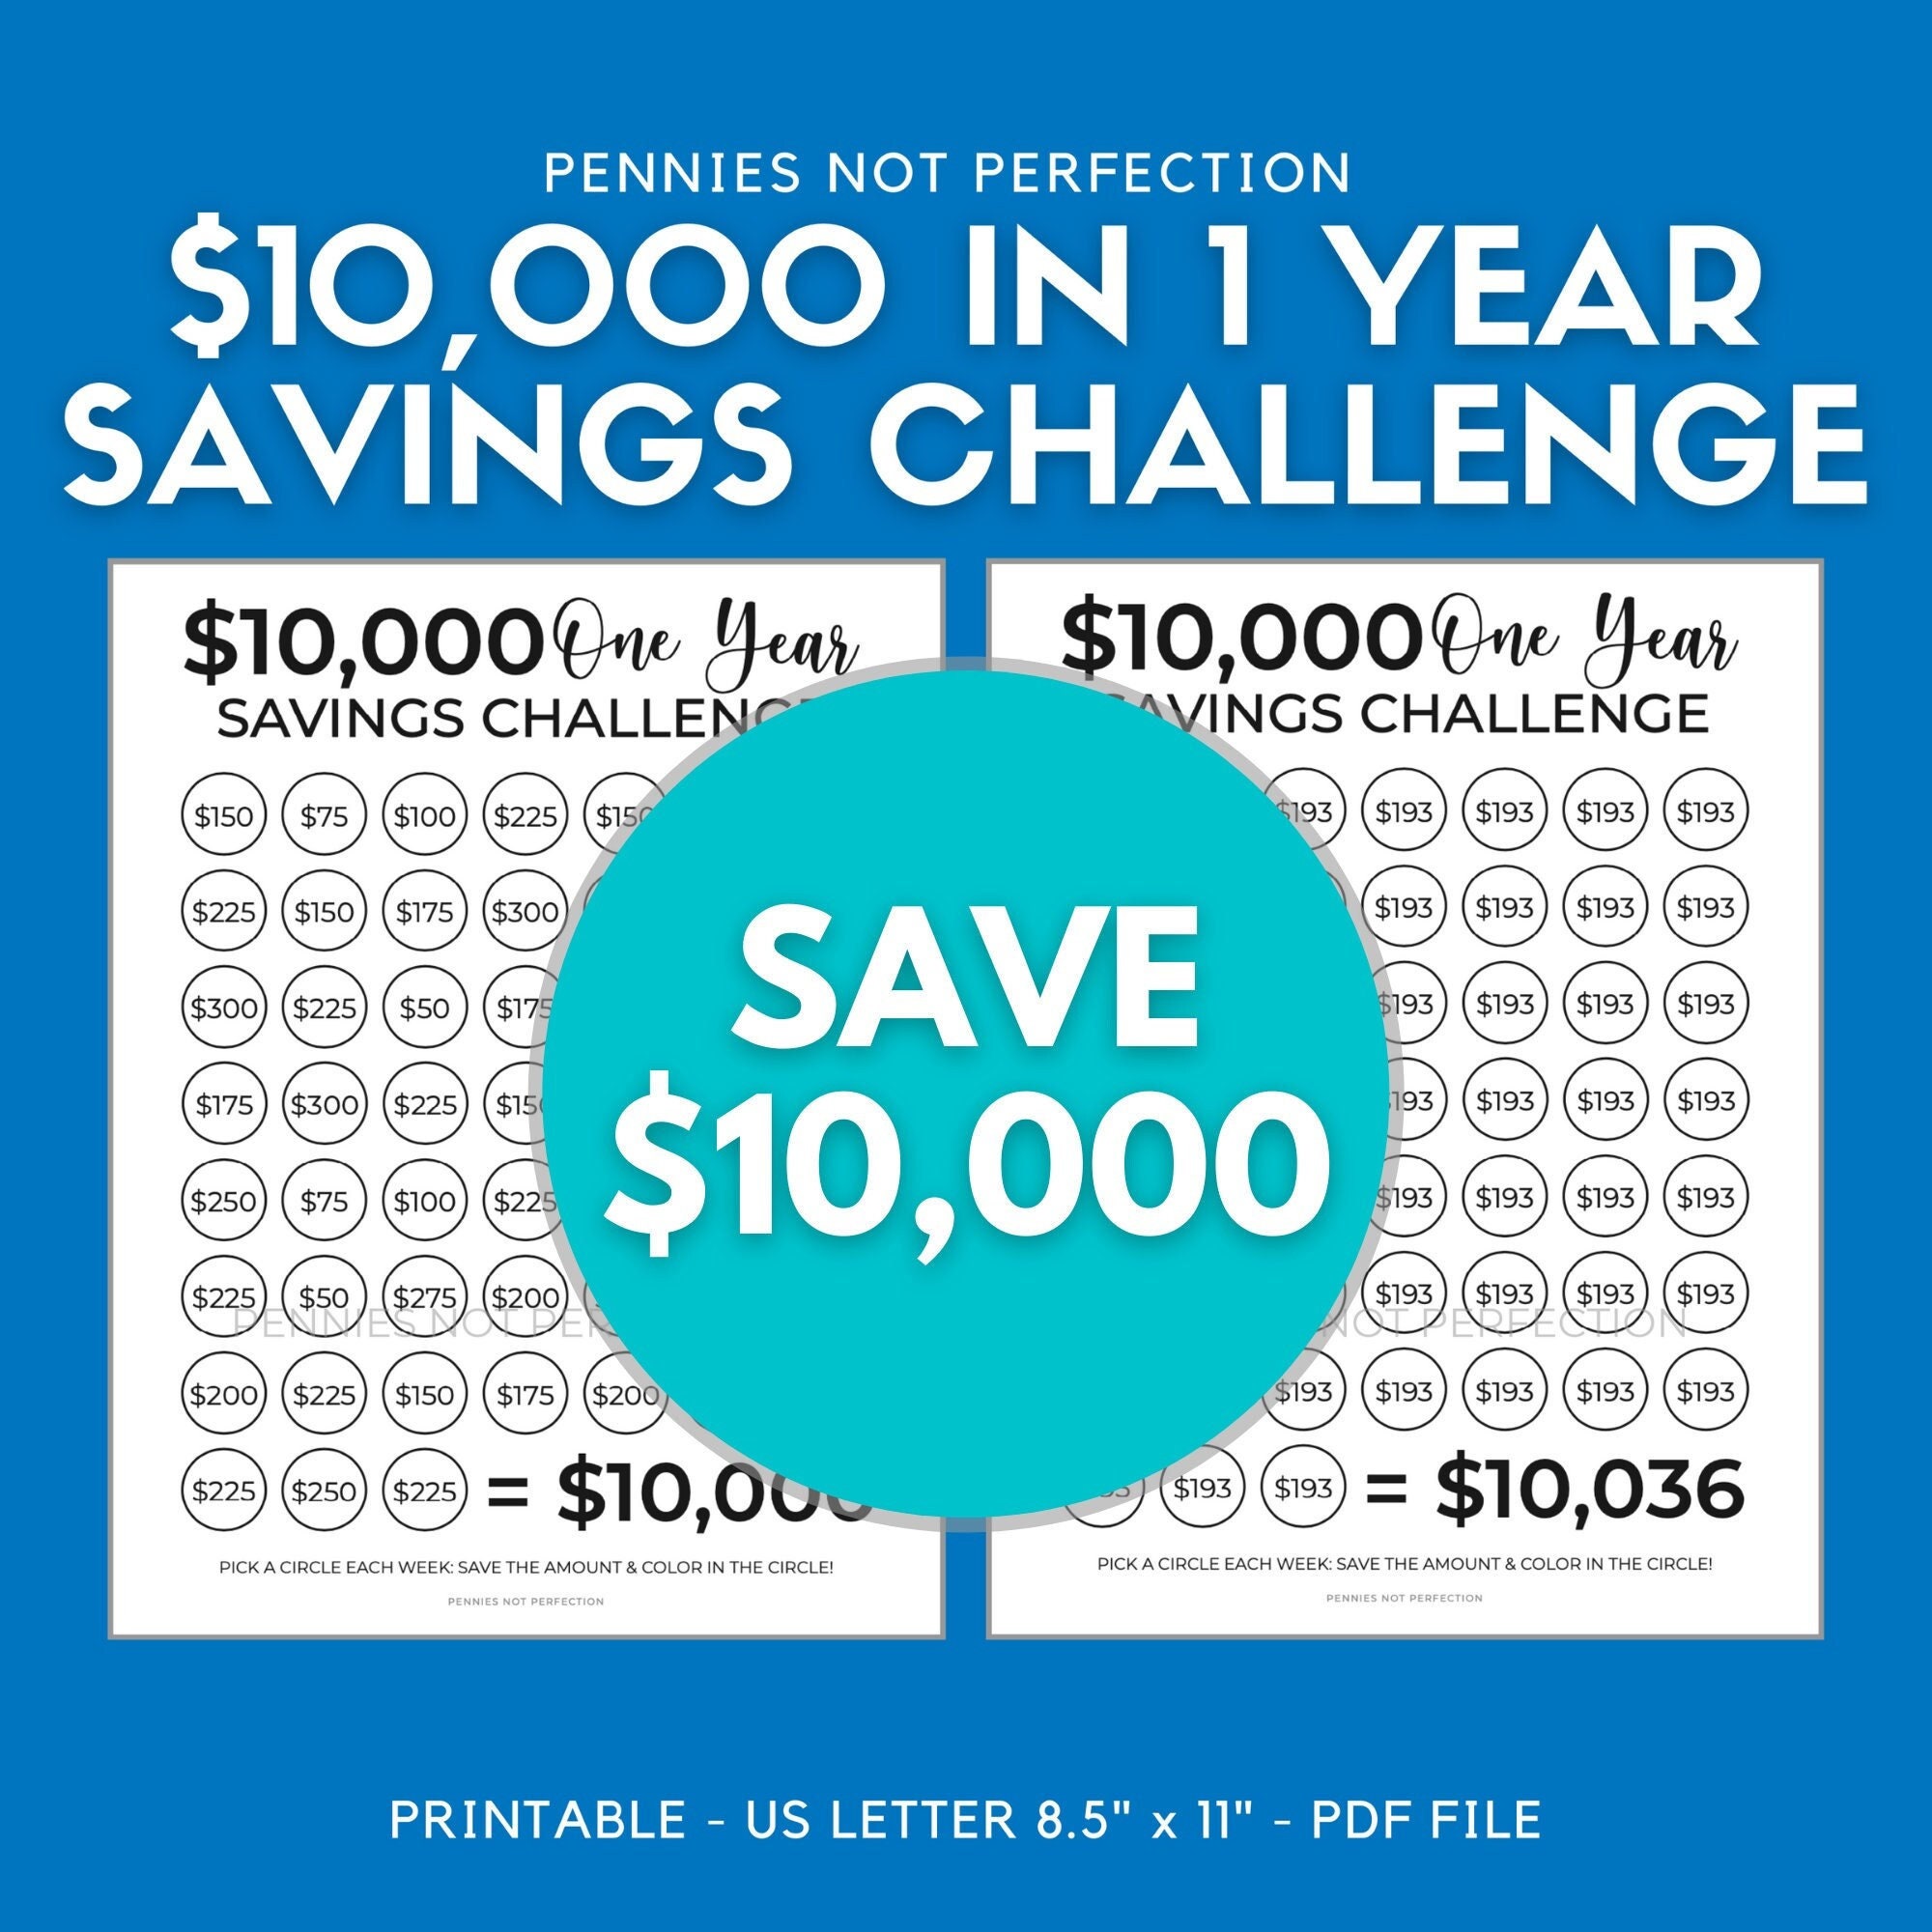 2 Paths To Saving an Extra $10,000 This Year